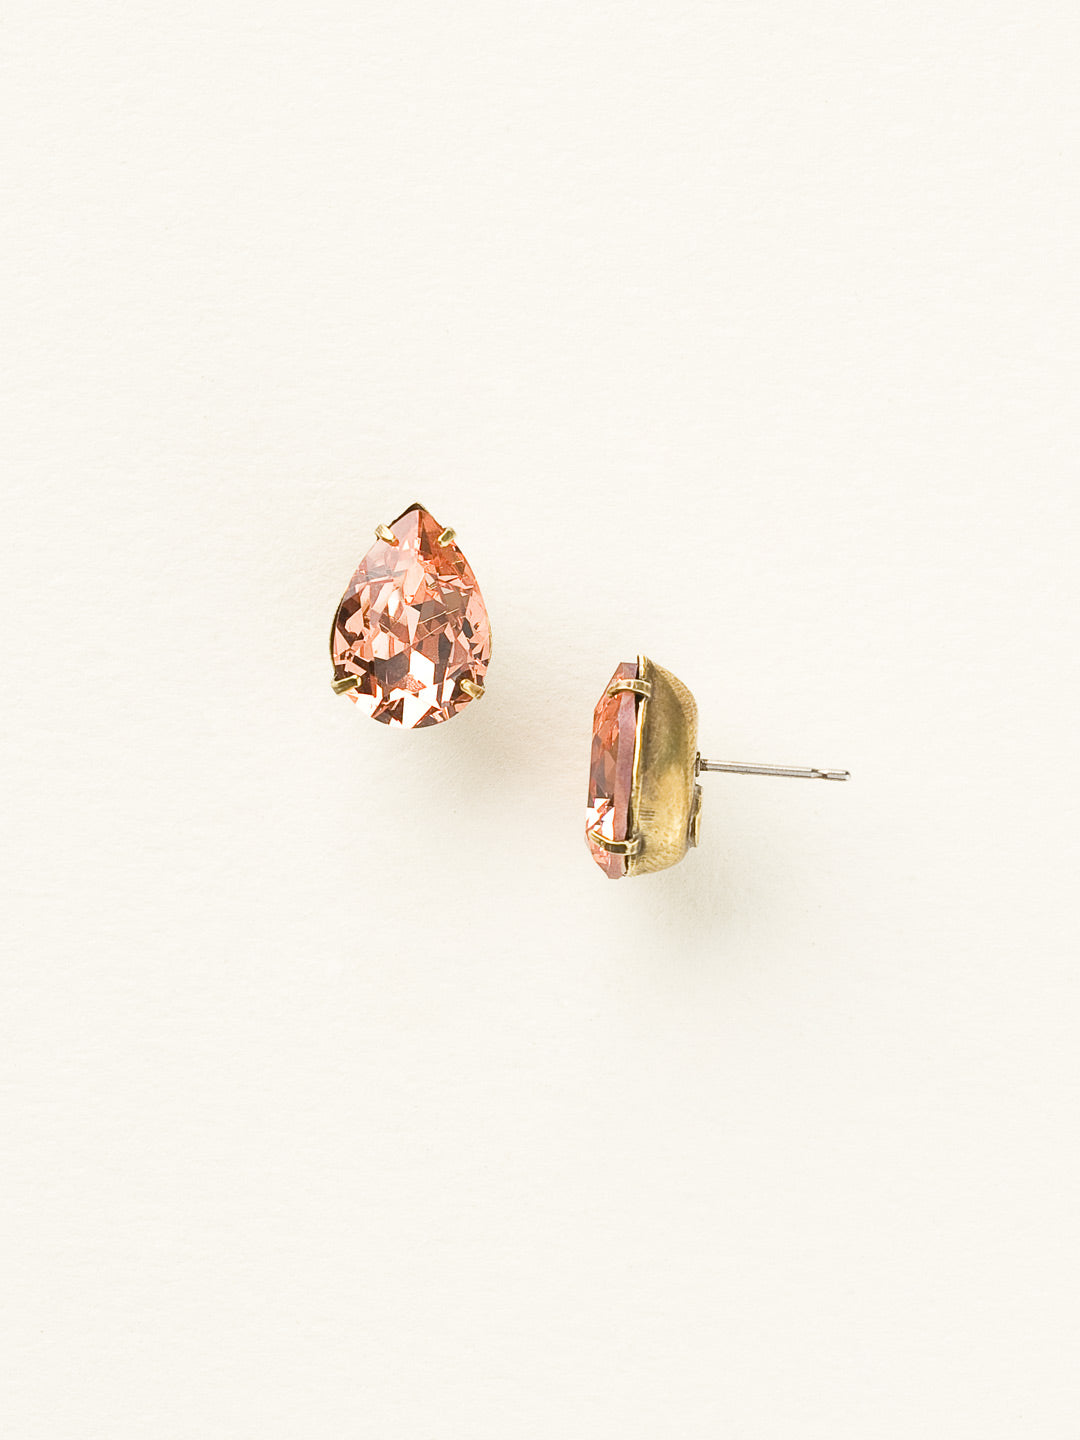 Ginnie Stud Earrings - ECR115AGBF - <p>A beautiful basic stud. These classic single teardrop post earrings are perfect for any occasion, especially the everyday look. A timeless treasure that will sparkle season after season. From Sorrelli's Black Fringe collection in our Antique Gold-tone finish.</p>